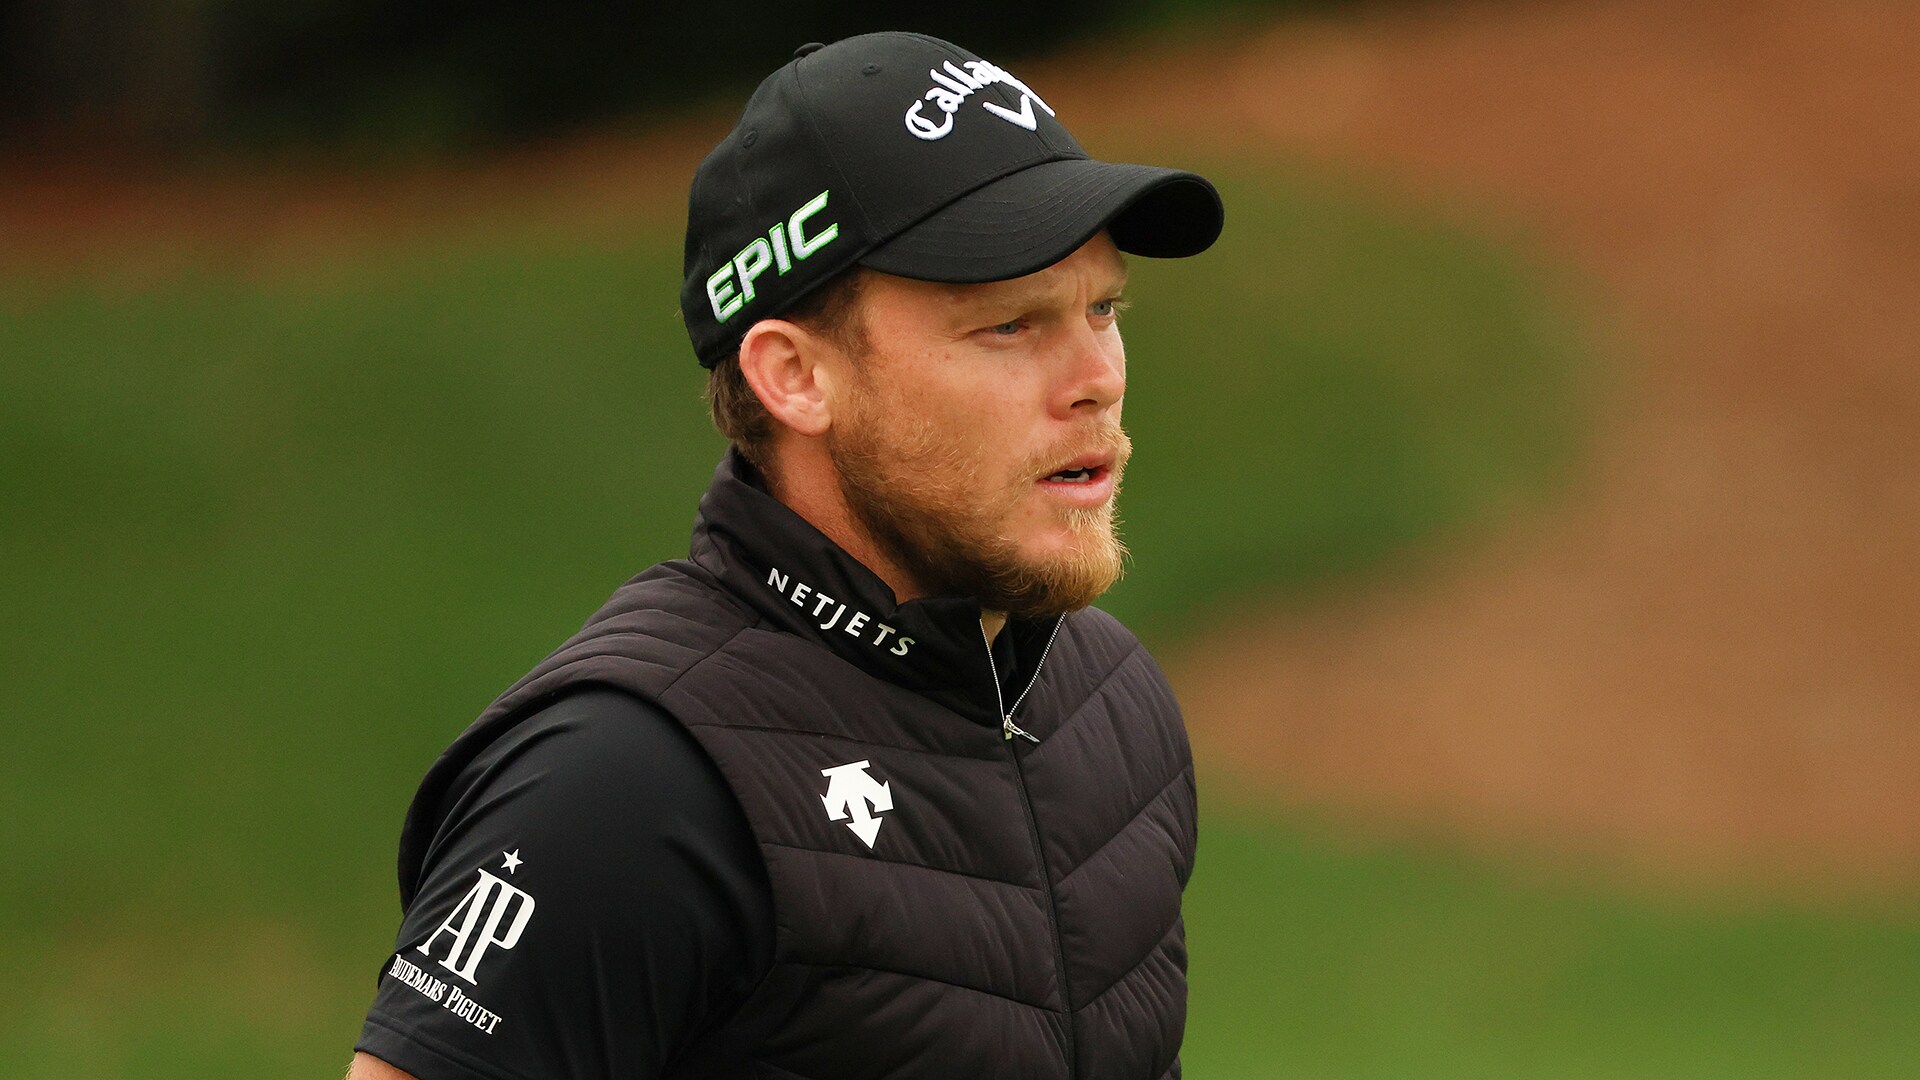 Danny Willett withdraws from The Players after positive COVID-19 result